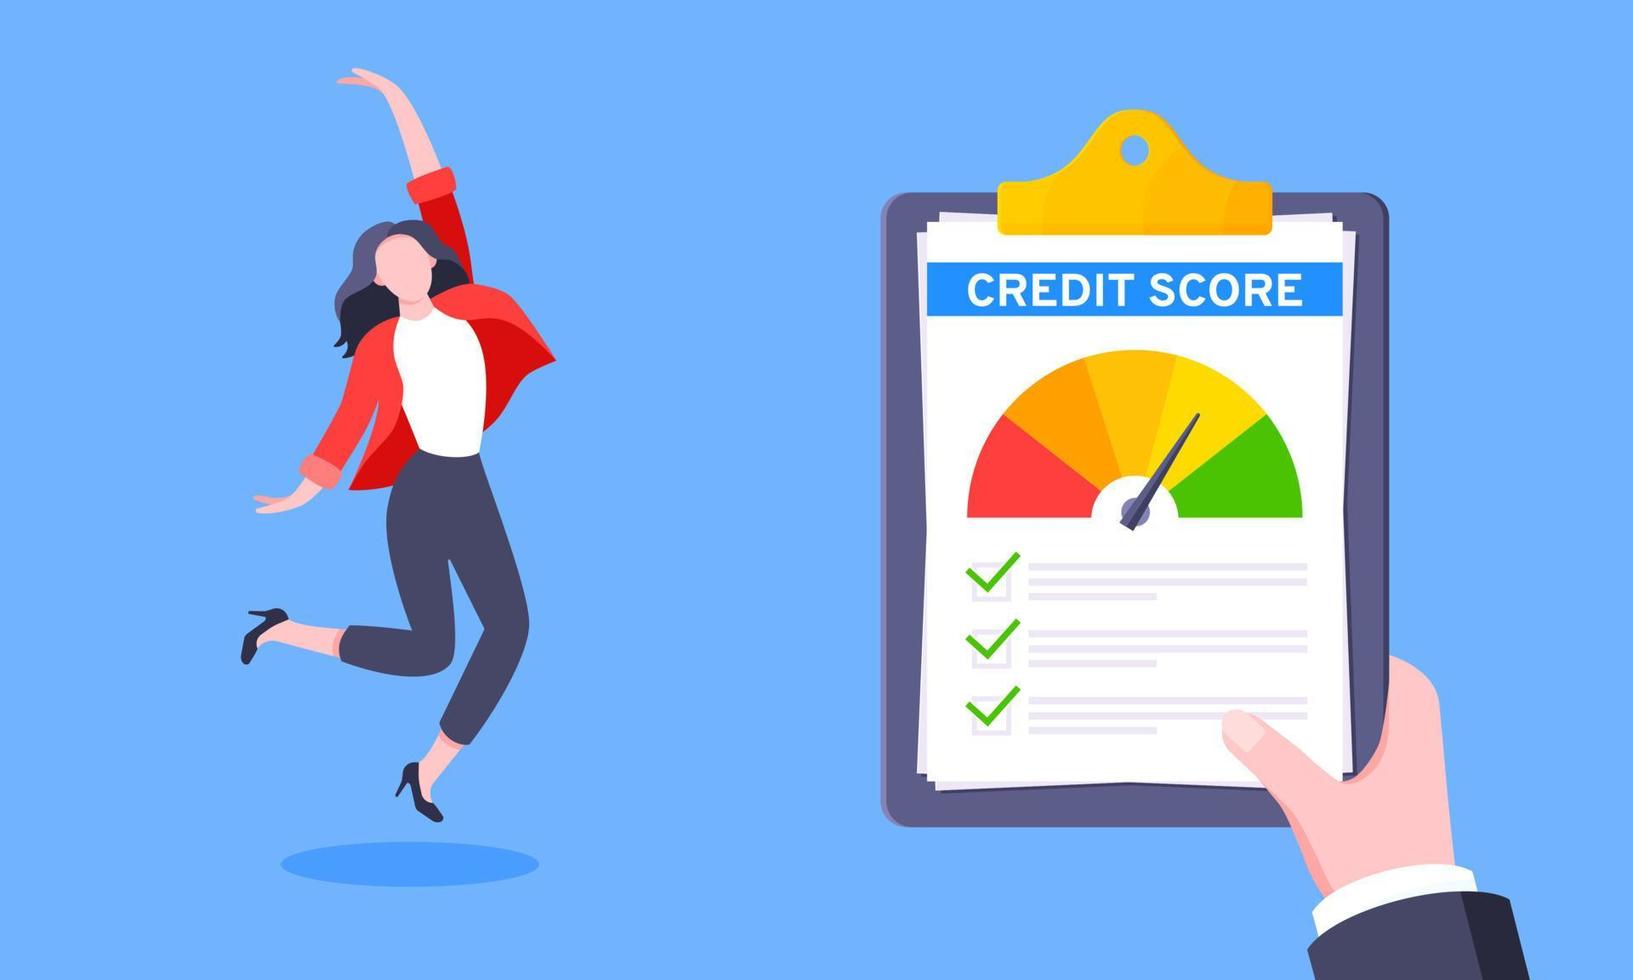 Good credit score business concept with clipboard, score gauge meter and happy person jumping in the air flat style design vector illustration.